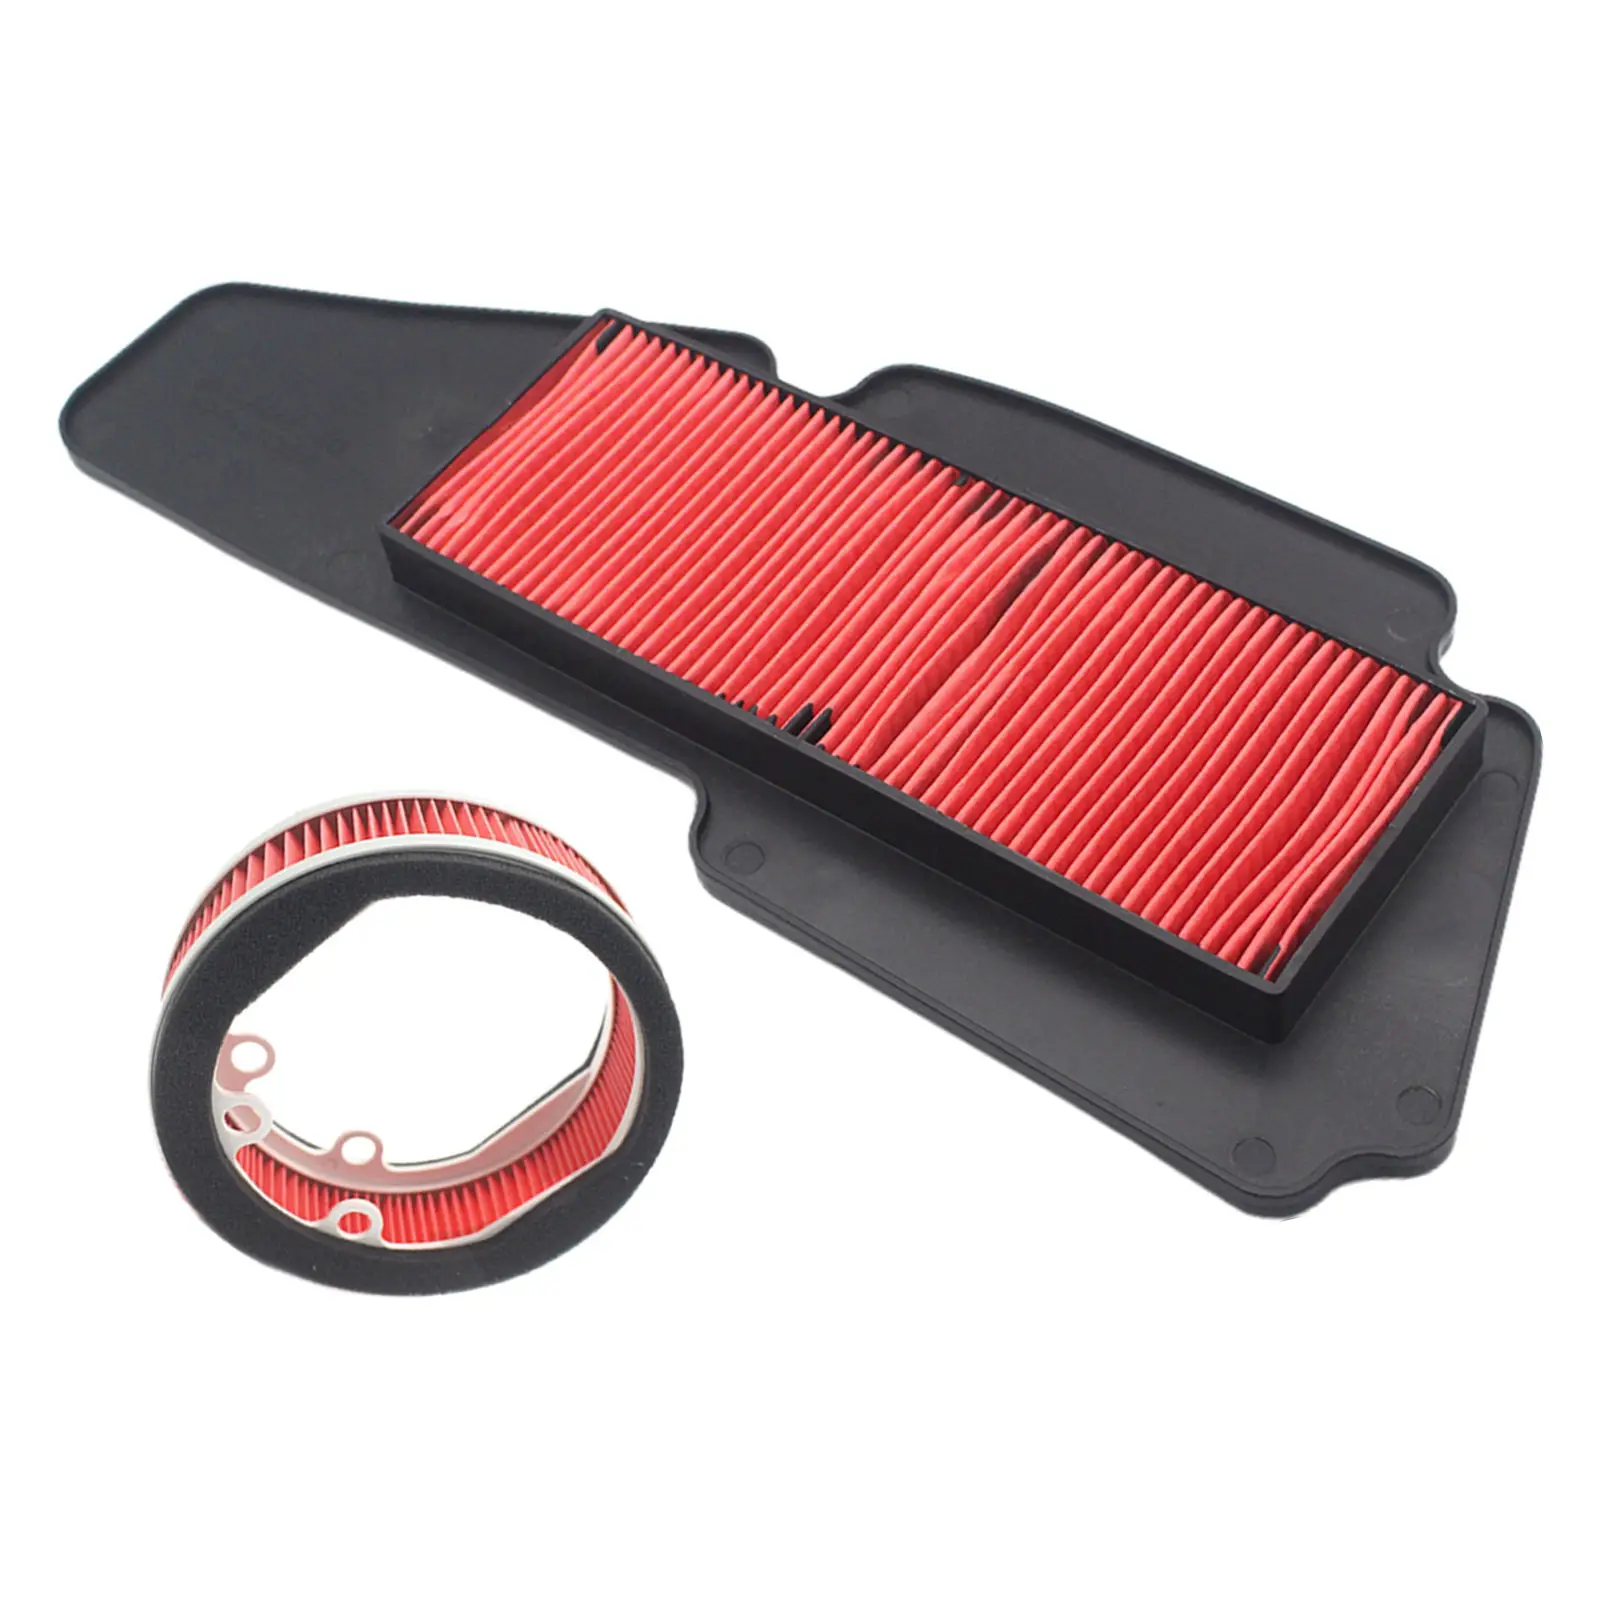 Durable Motocycle Air Filter Repalcements Parts for YAMAHA SMAX155 FORCE155 Repalce Old Parts